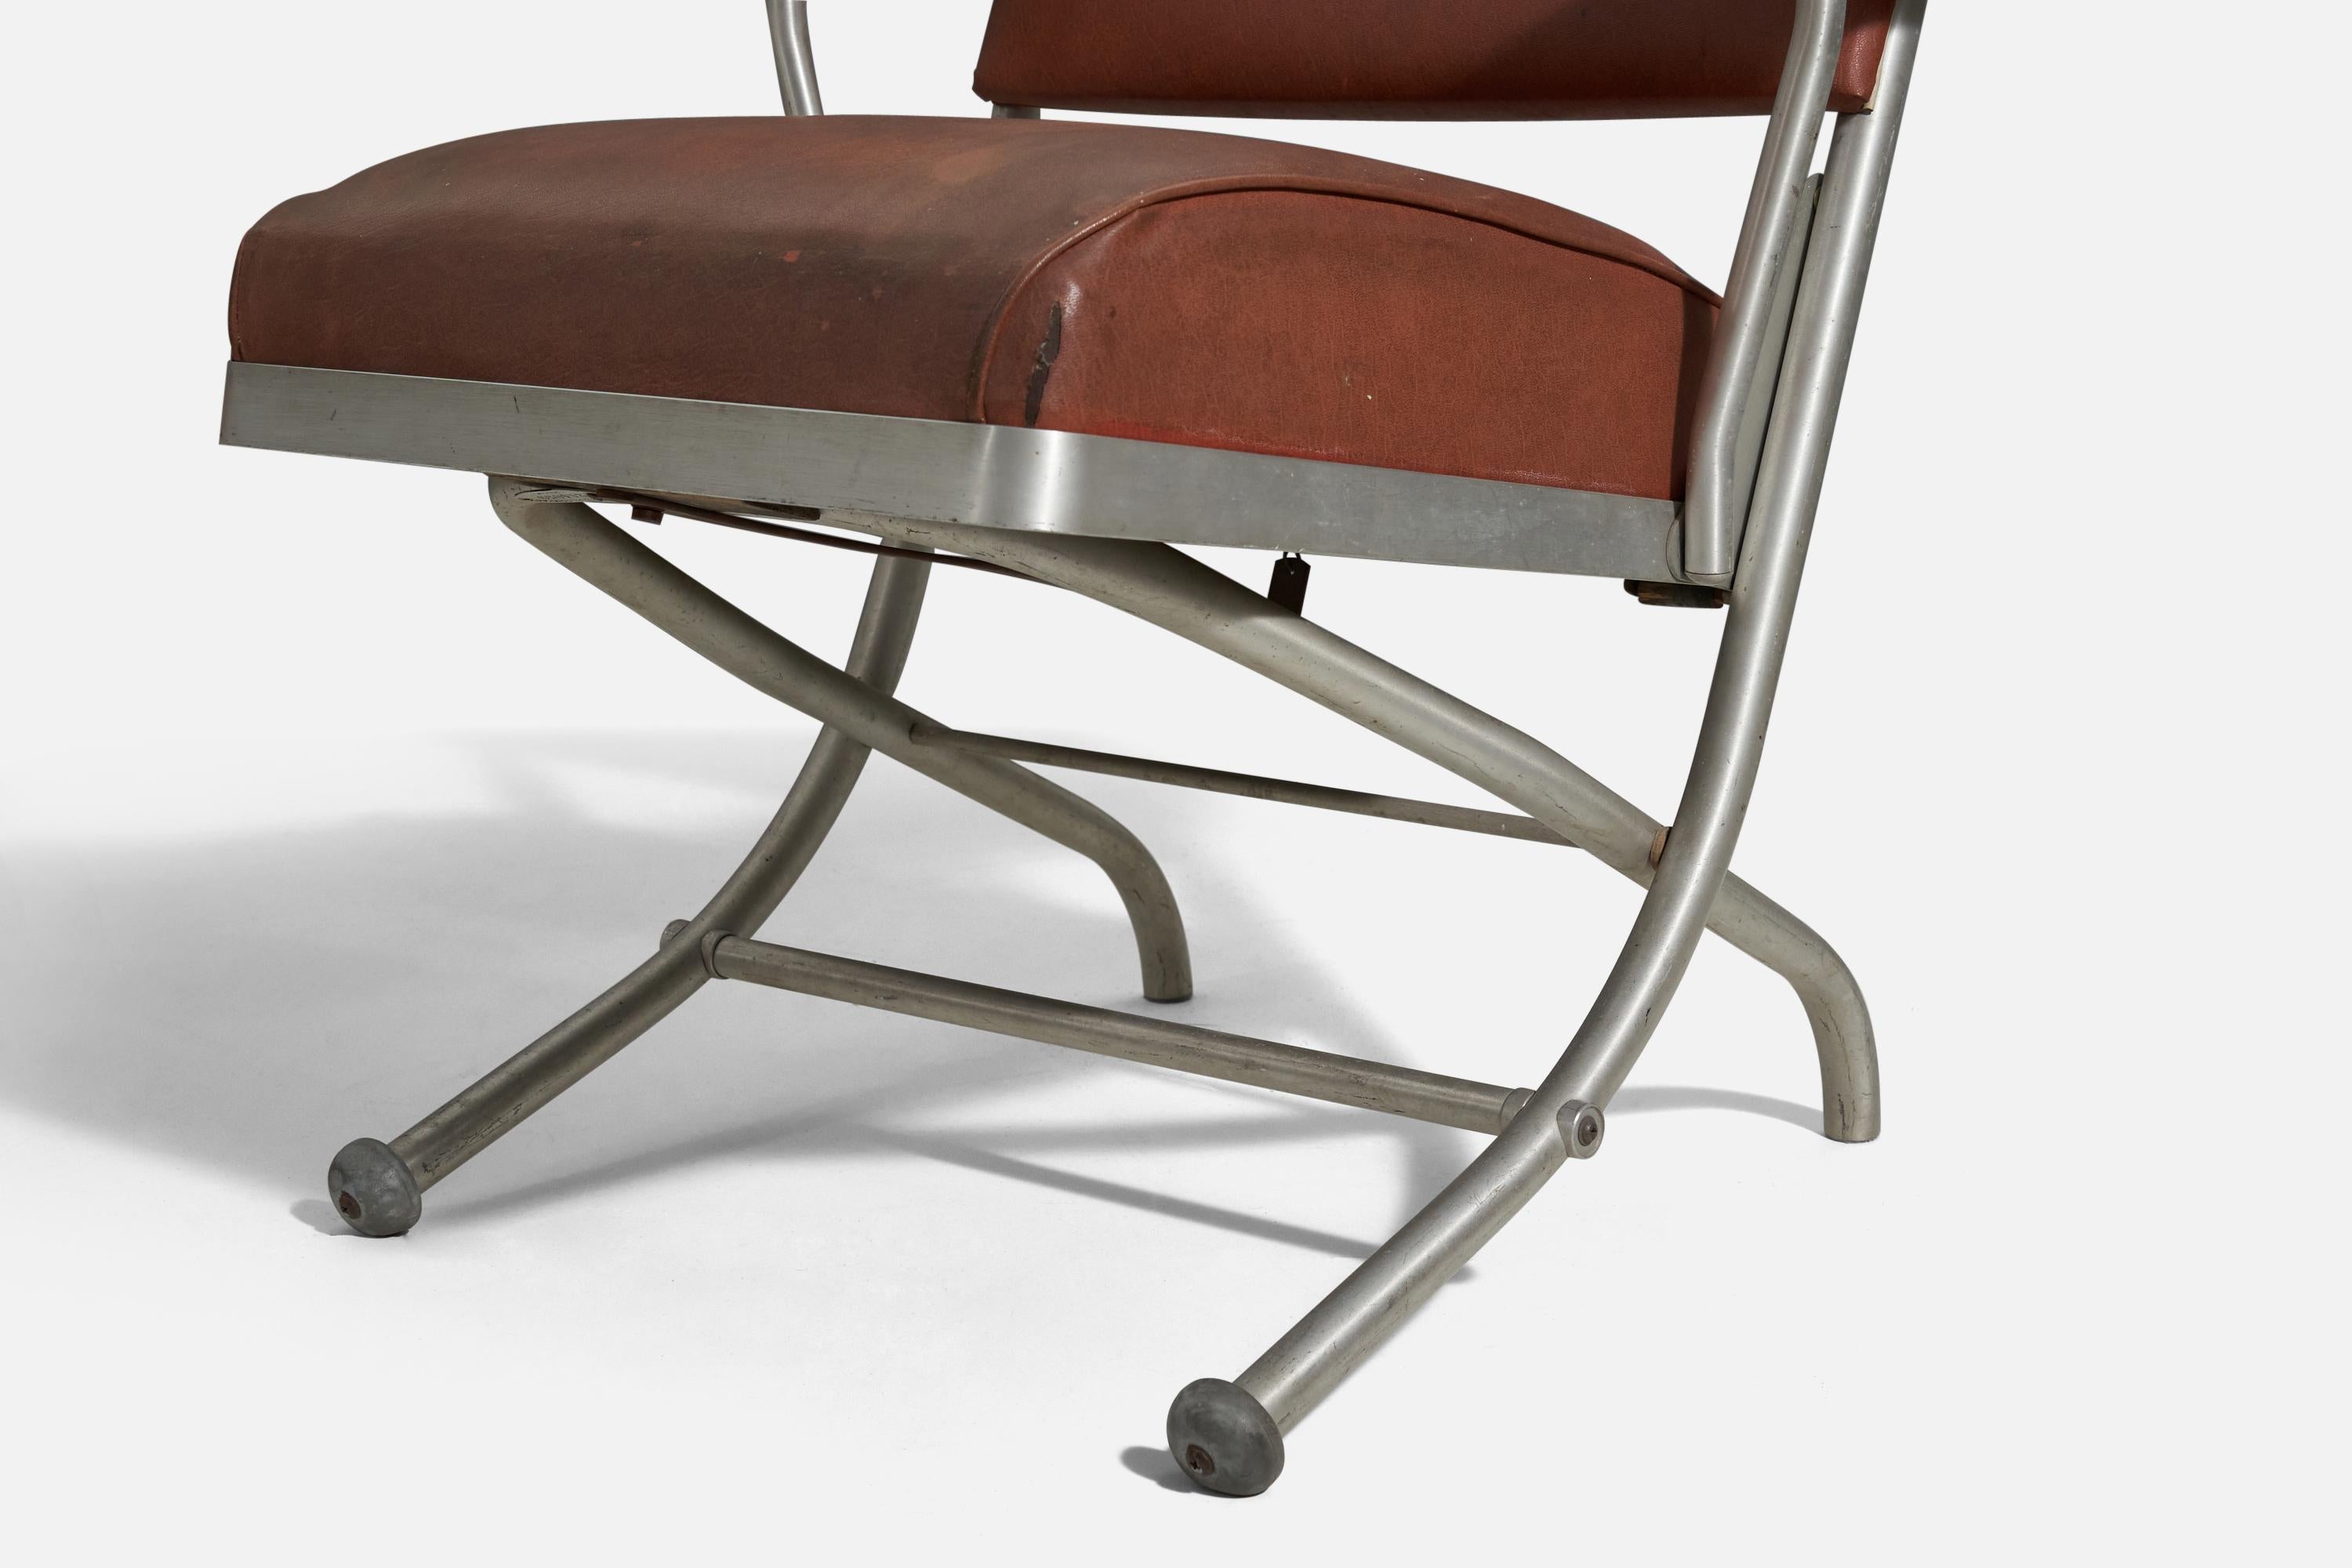 Mid-20th Century Warren McArthur, Arm Chairs, Steel, Vinyl, United States, 1930s For Sale